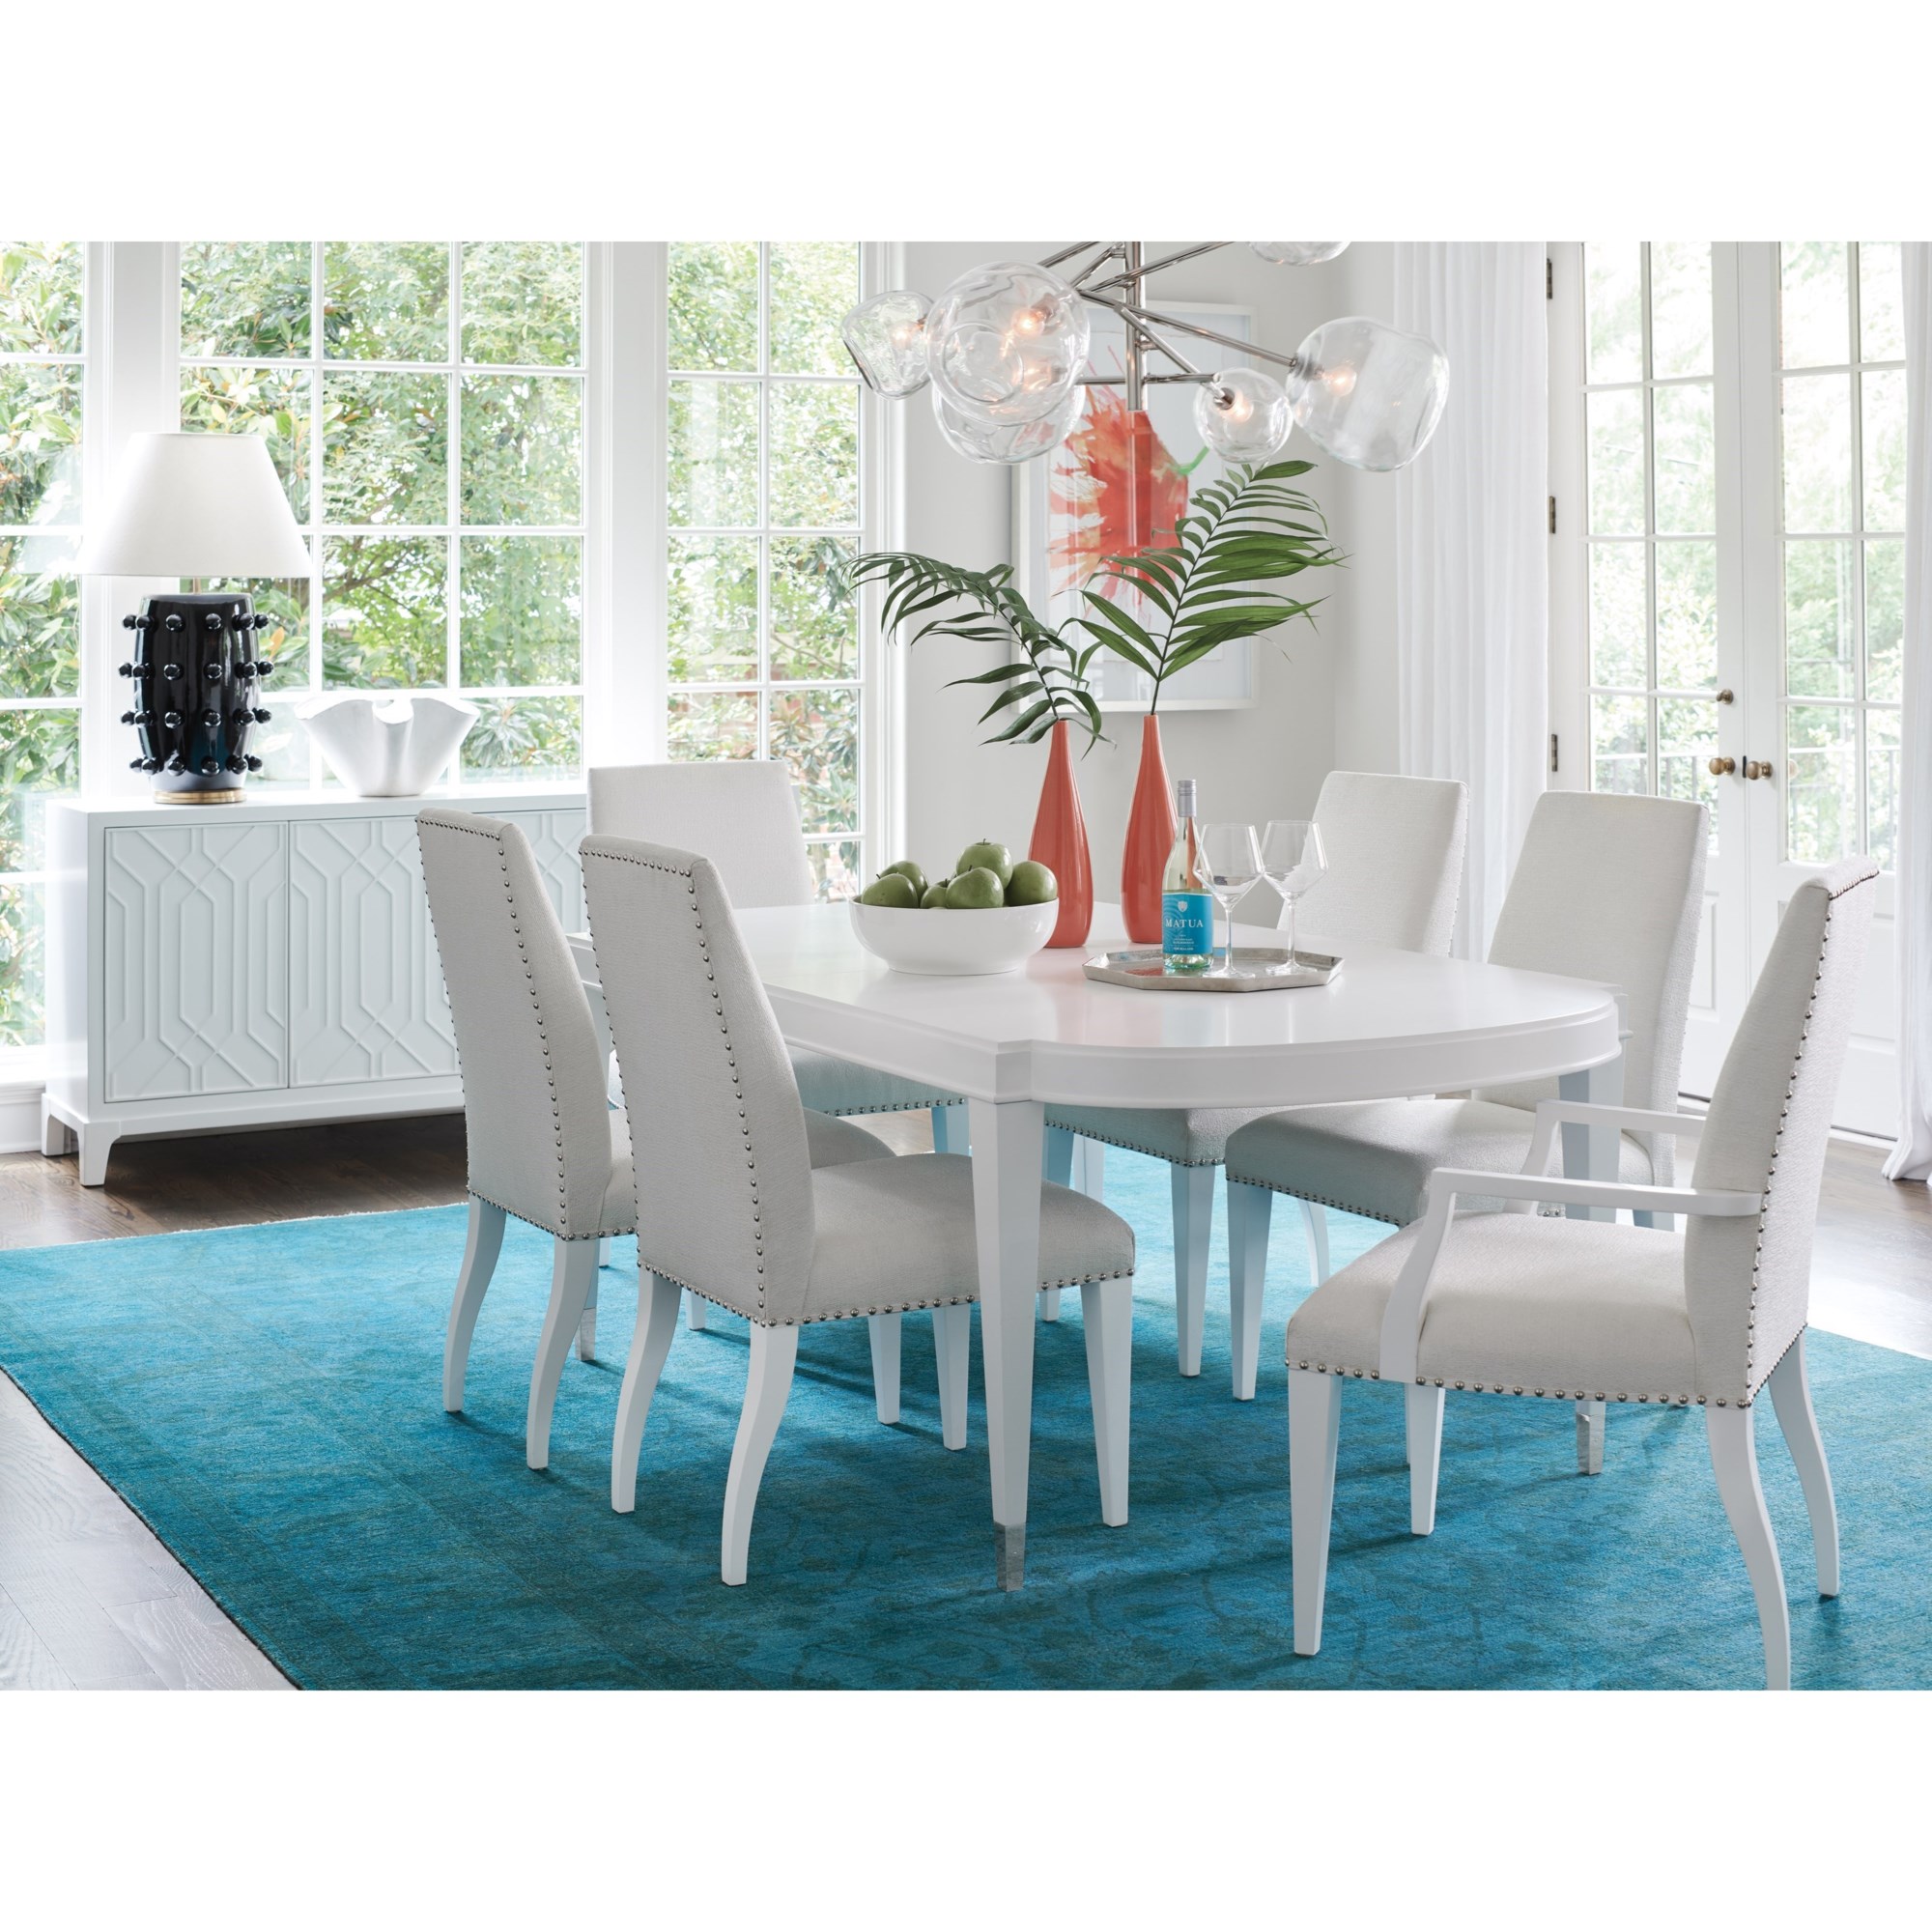 Lexington Avondale 415-877+2X881-01+4X880-01 7 Piece Dining Set with Vernon  Hills Oval Table with Leaves, Belfort Furniture